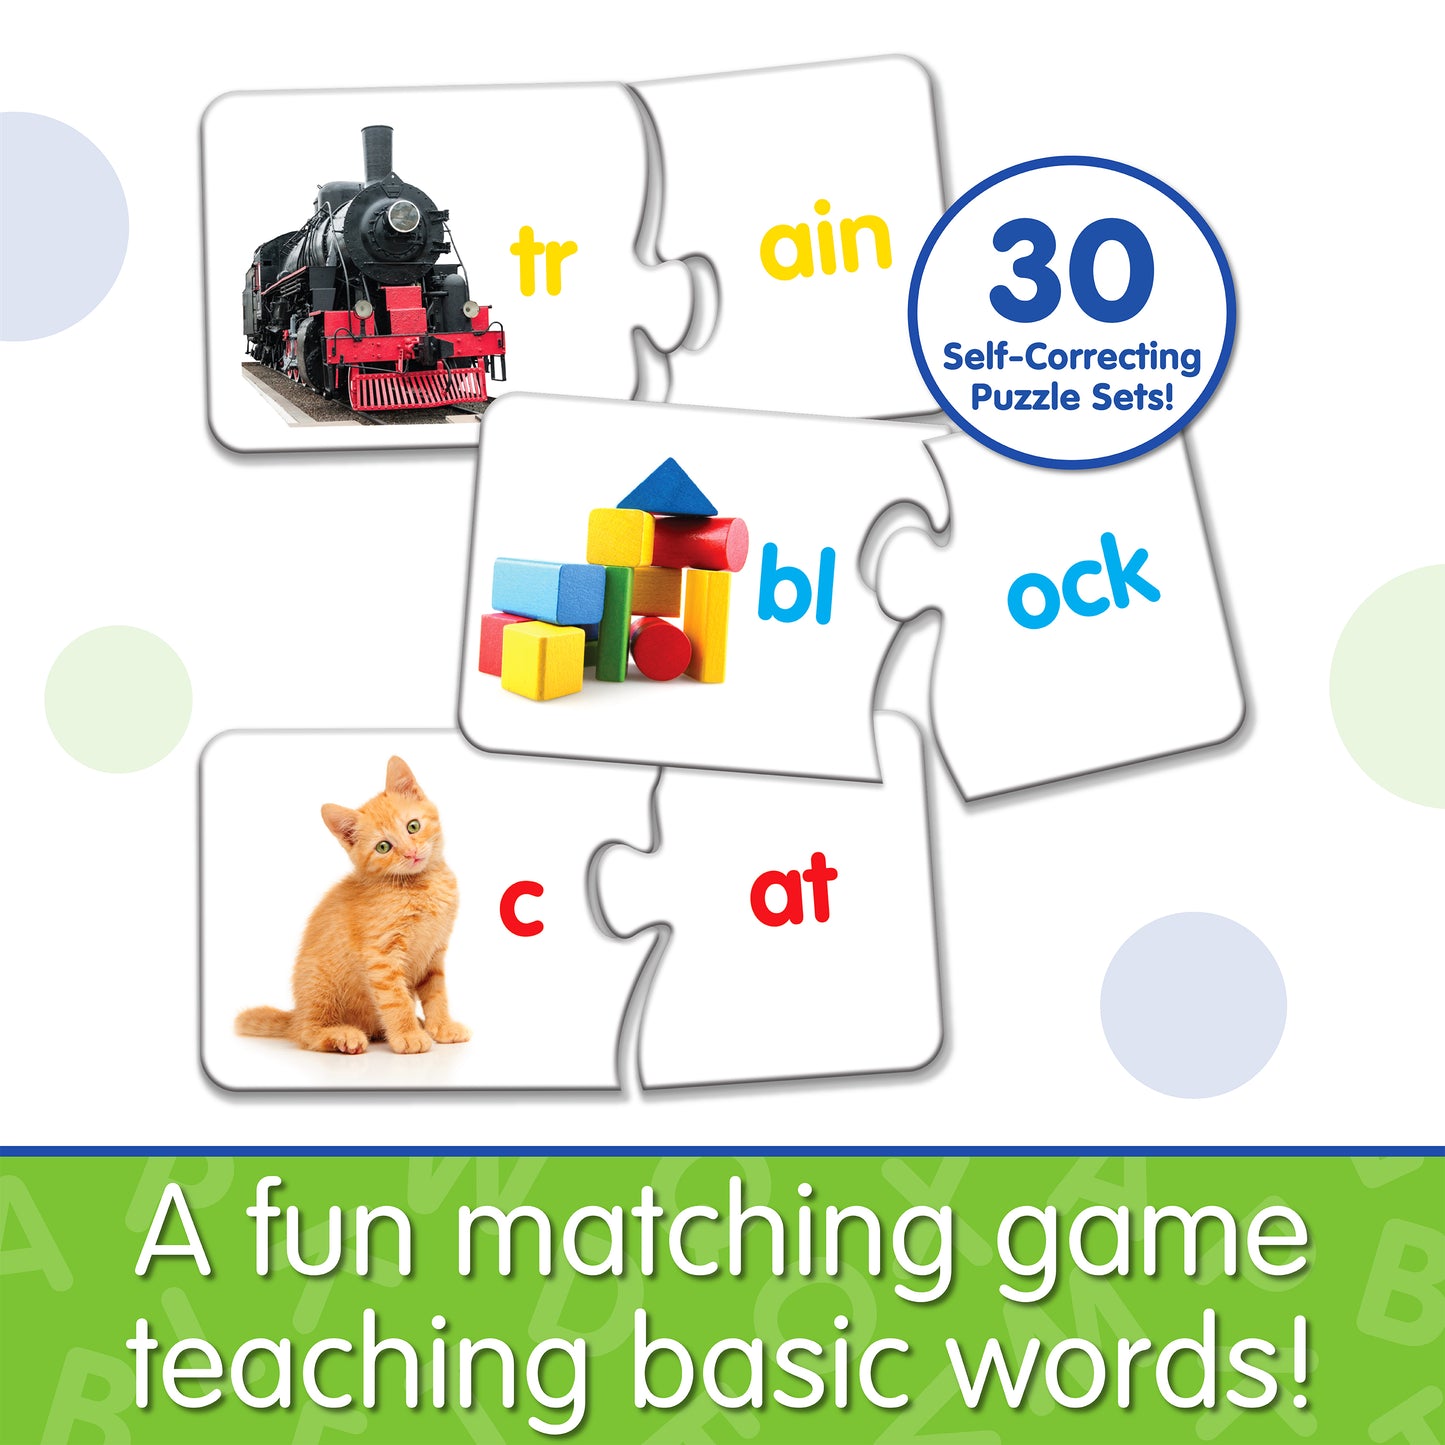 Infographic about Match It - Words that says, "A fun matching game teaching basic words!"